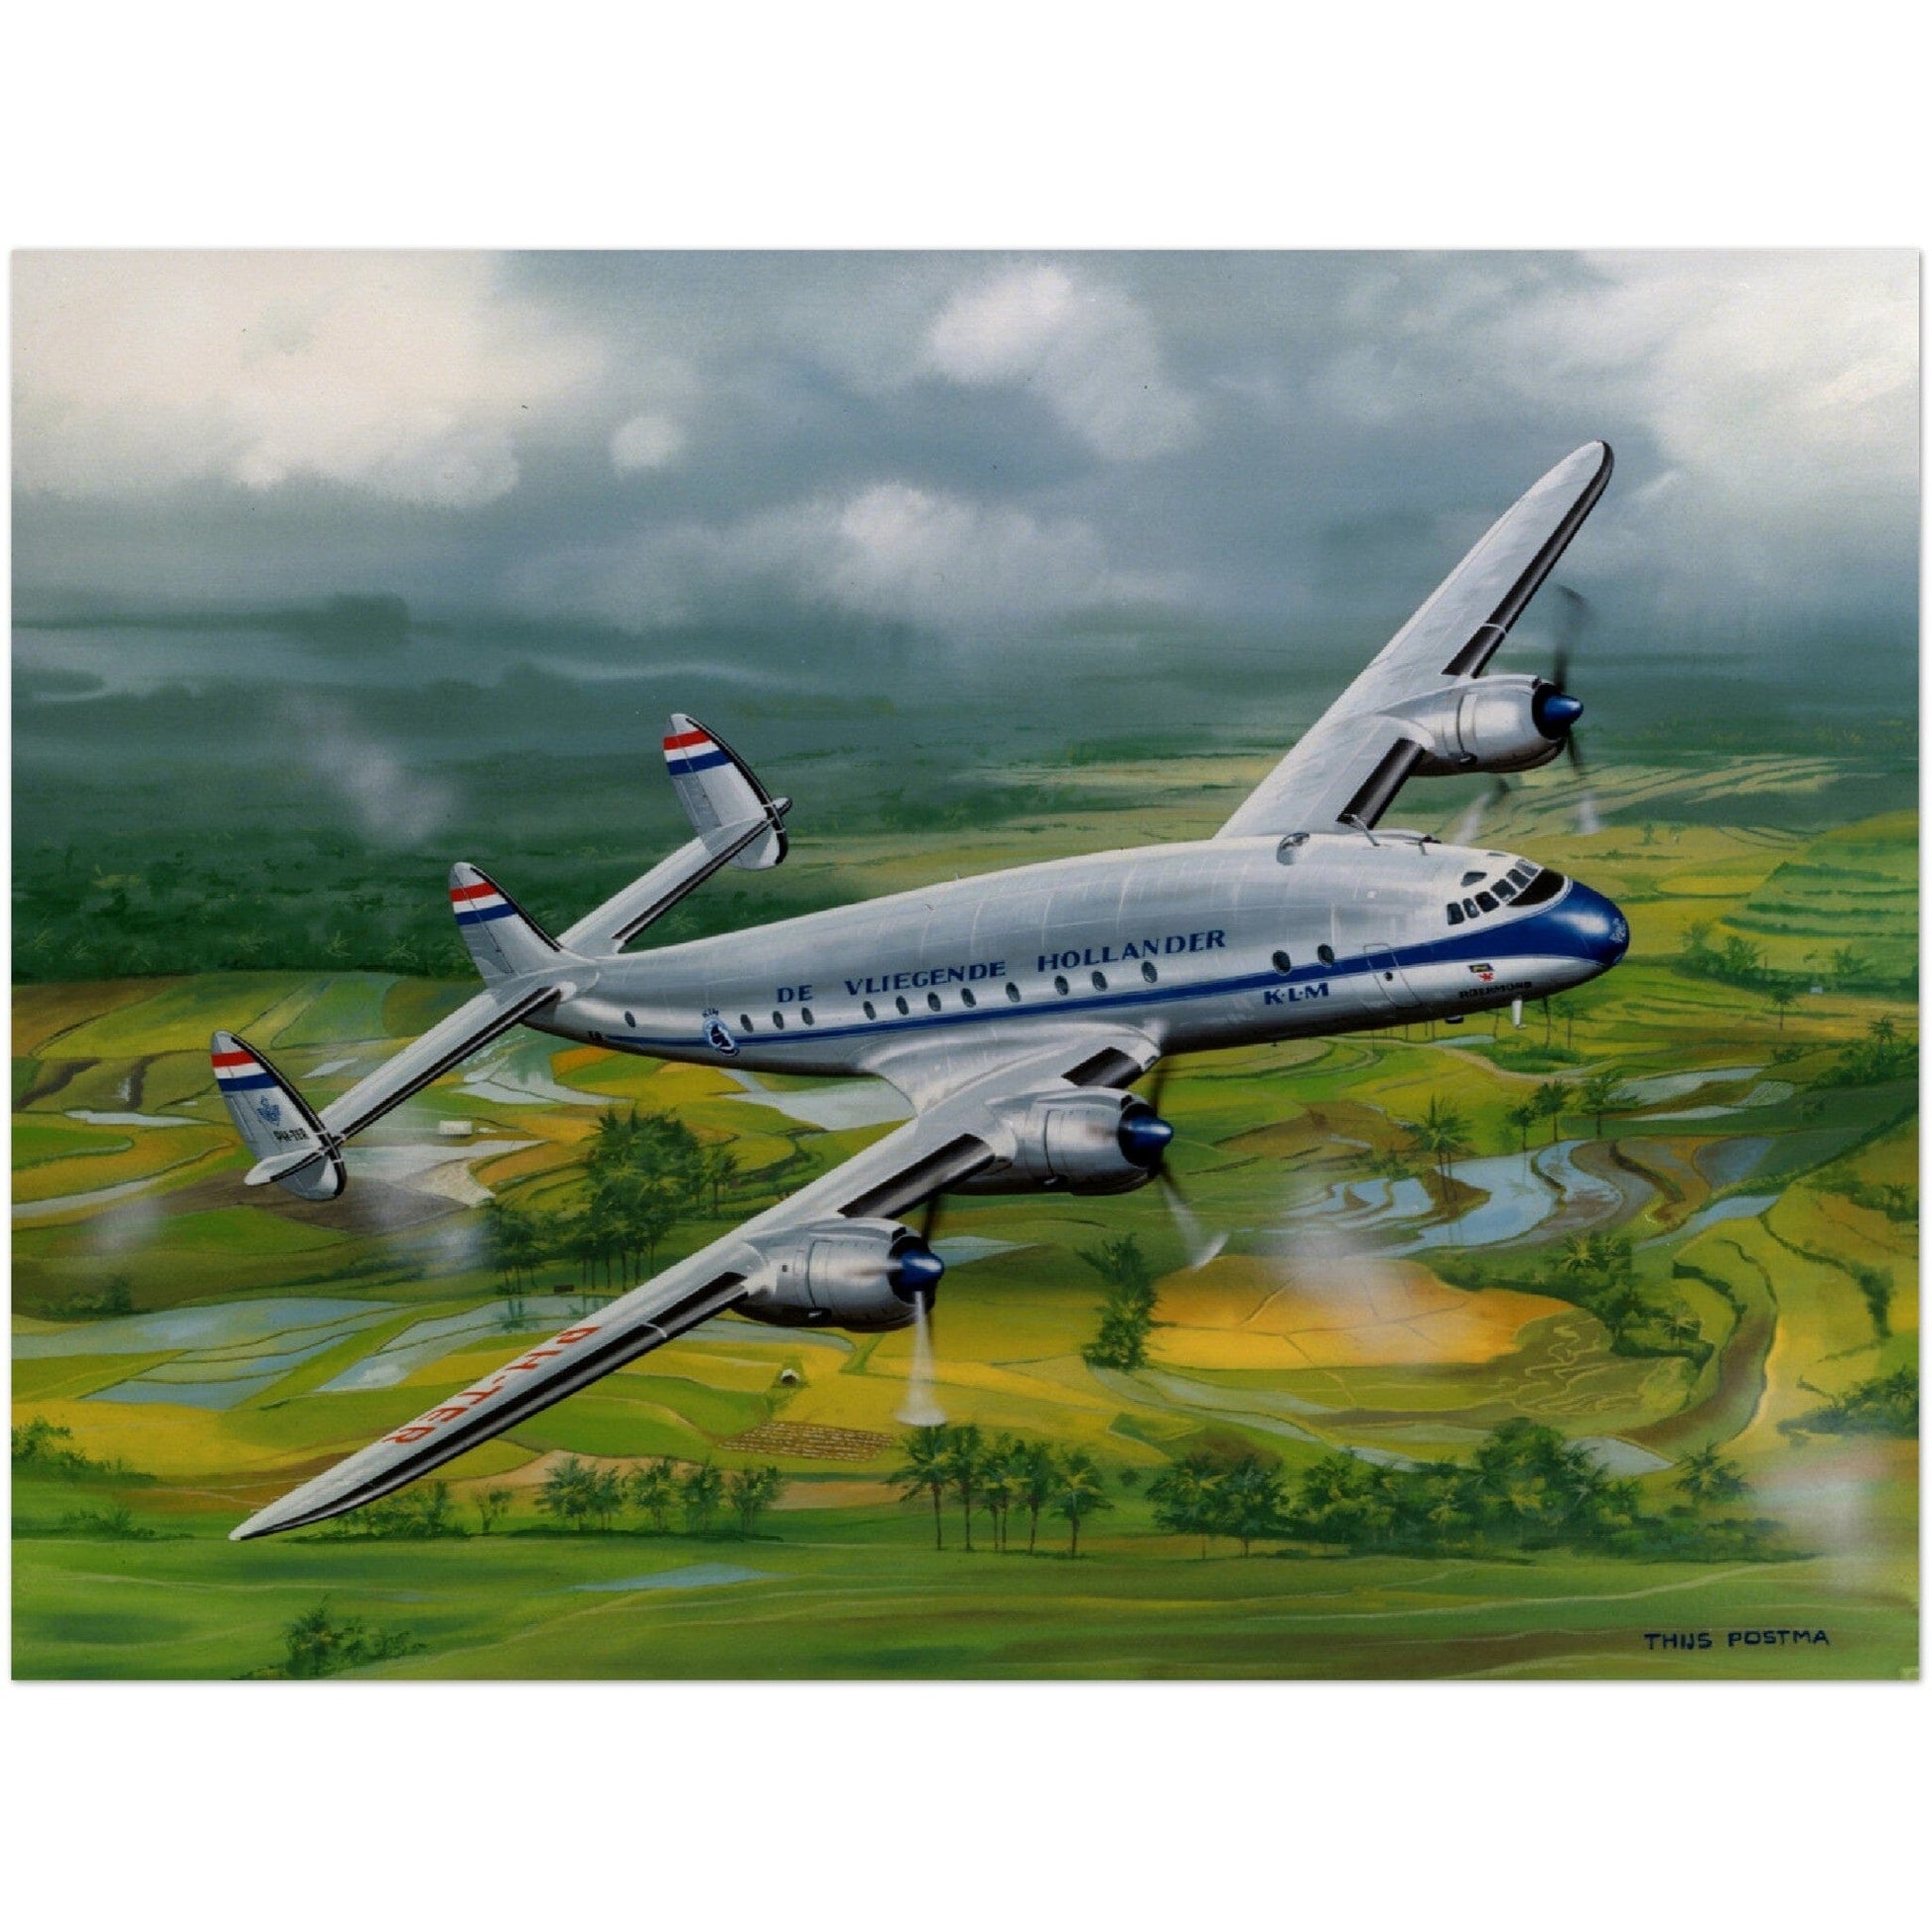 Thijs Postma - Poster - Lockheed L-749 Over Sawahs Poster Only TP Aviation Art 45x60 cm / 18x24″ 